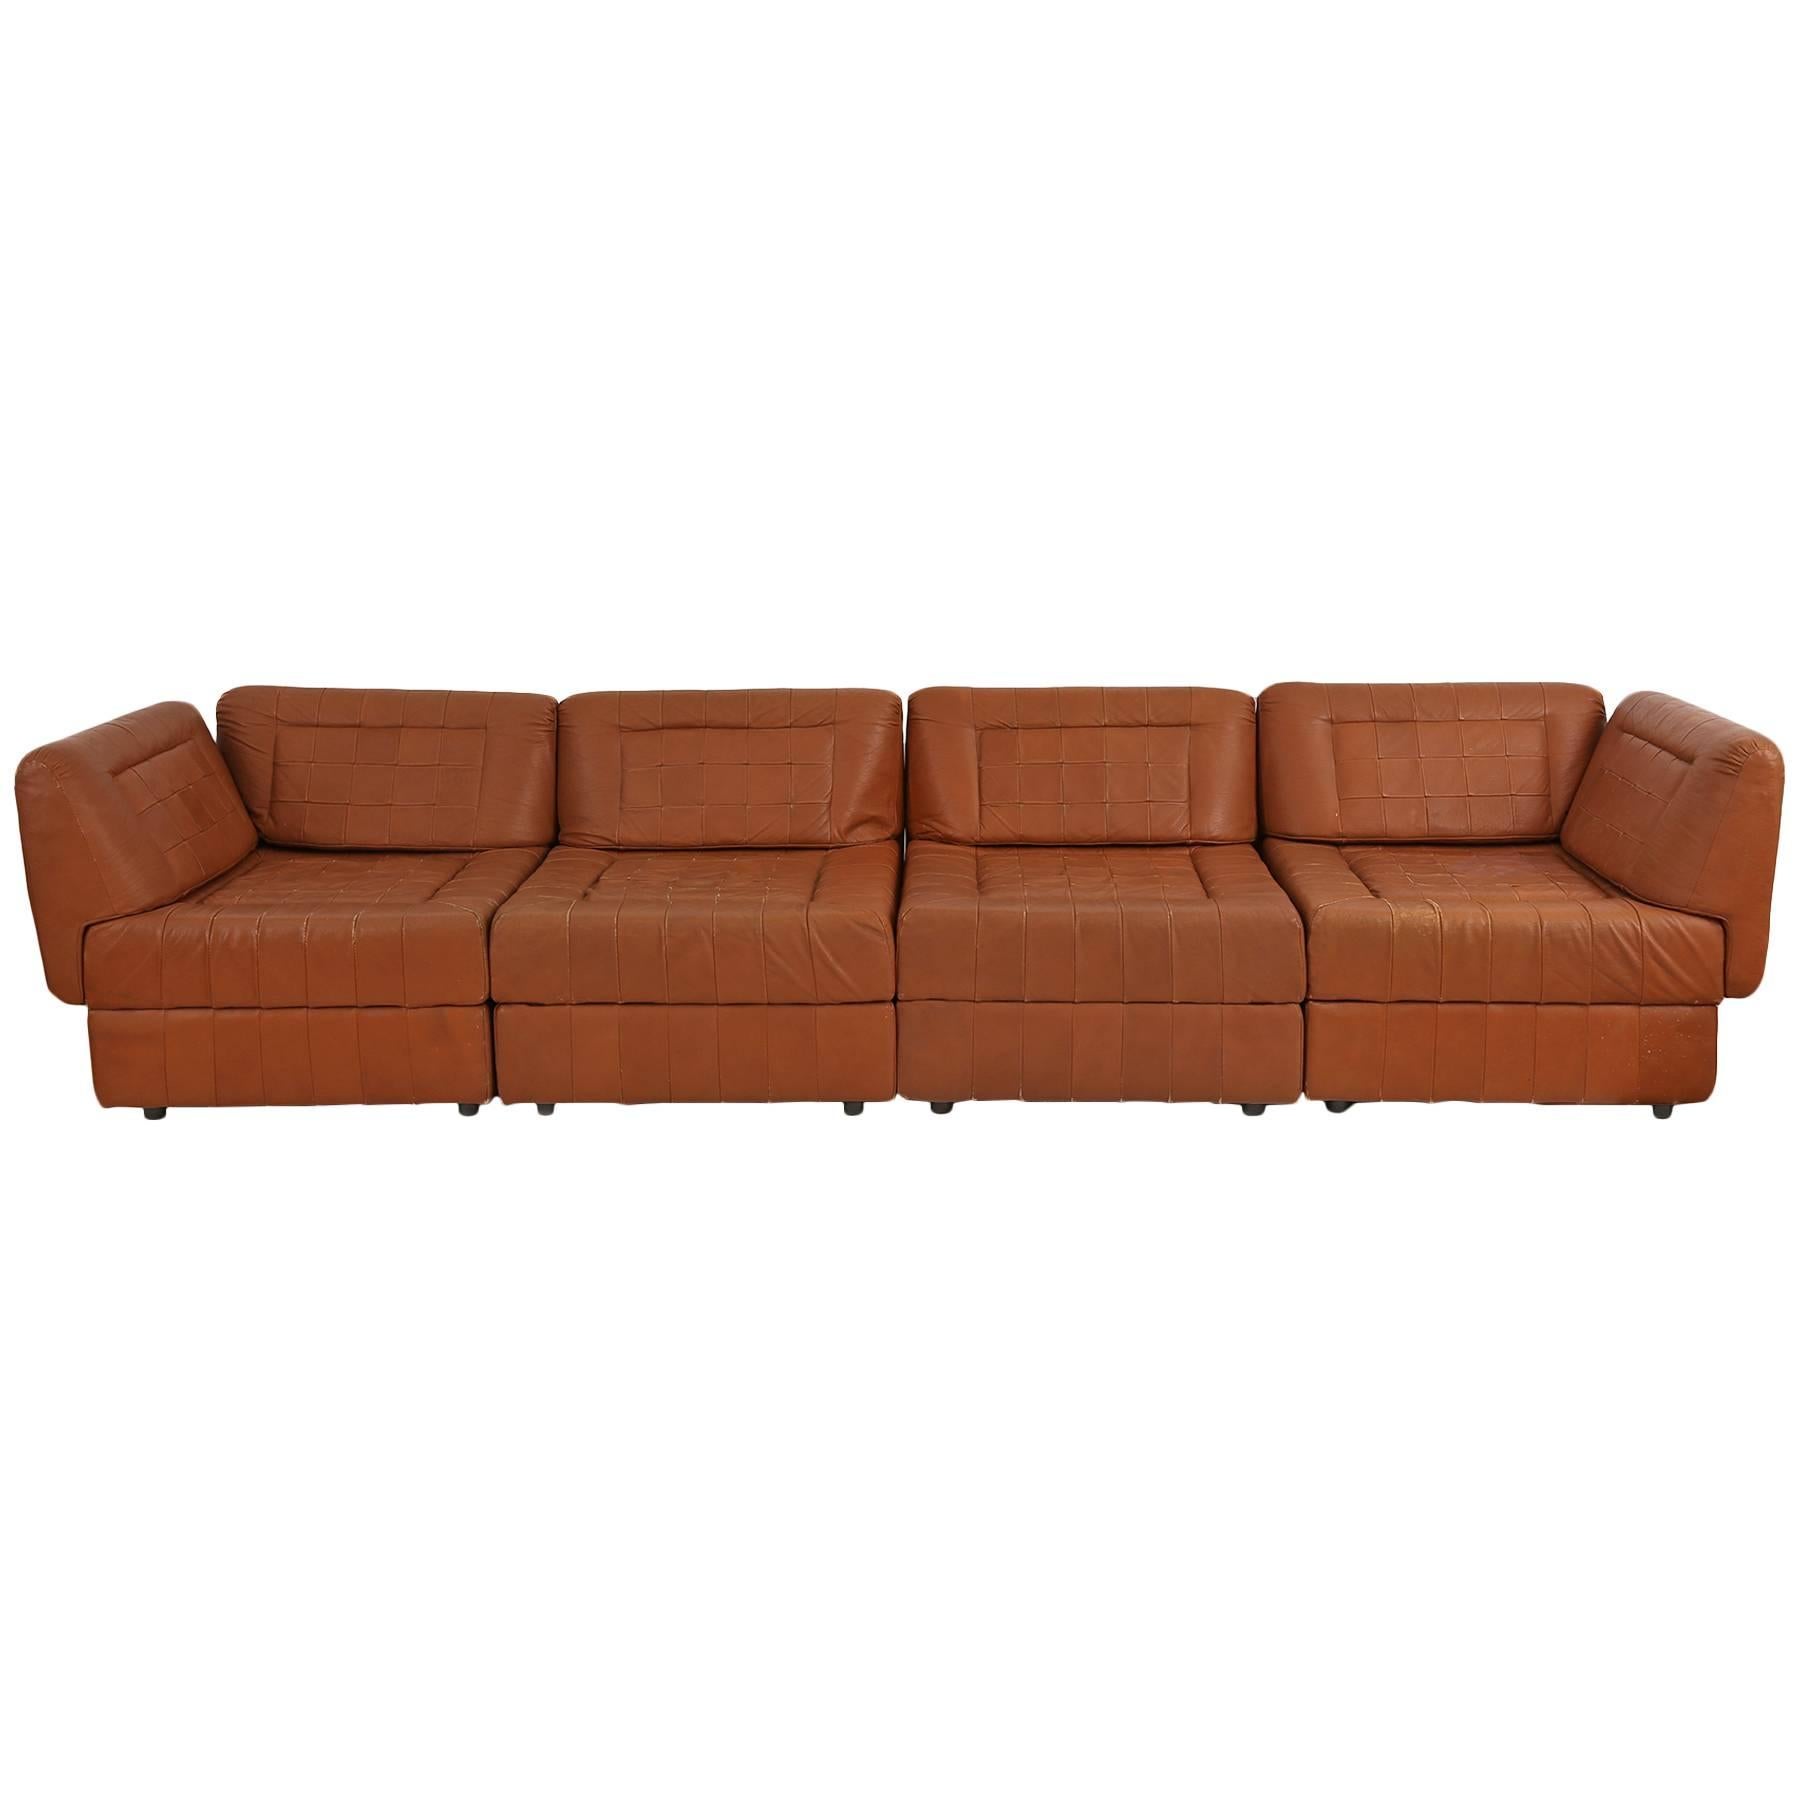 Percival Lafer Patchwork Leather Sofa